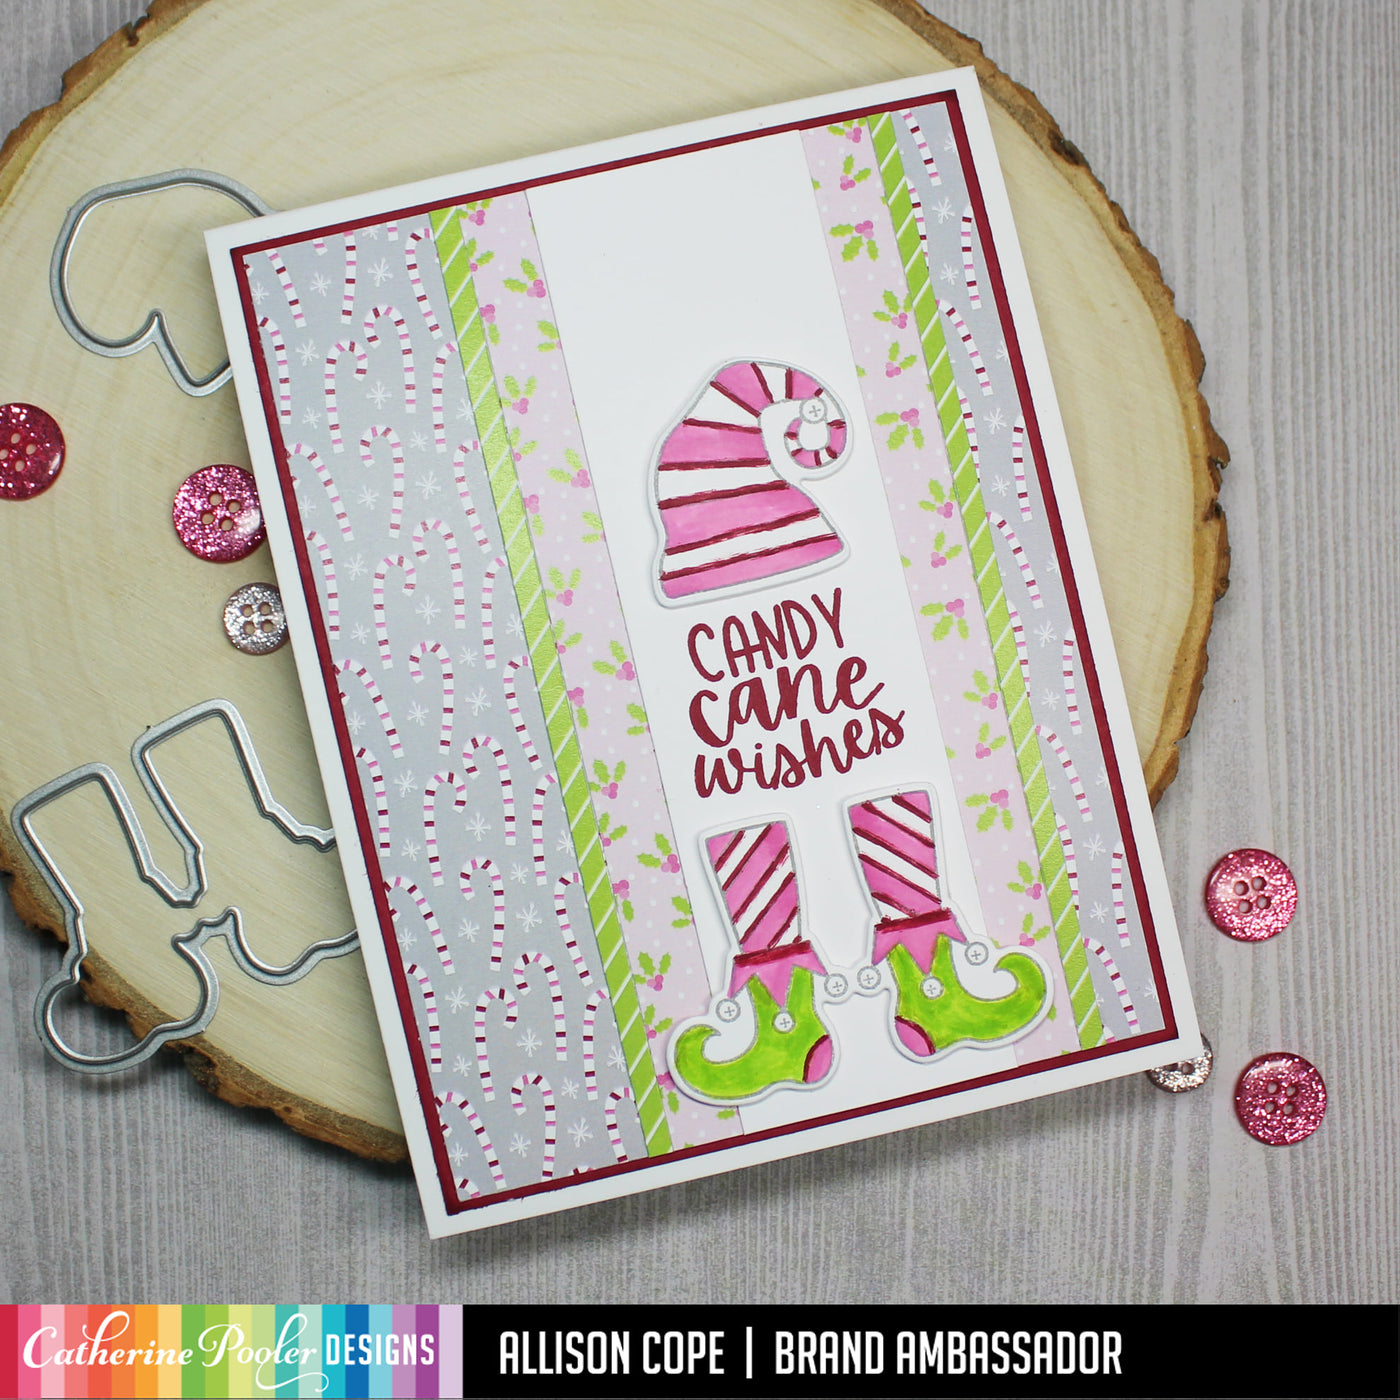 Catherine Pooler Designs - Clear Stamps - Aged to Perfection